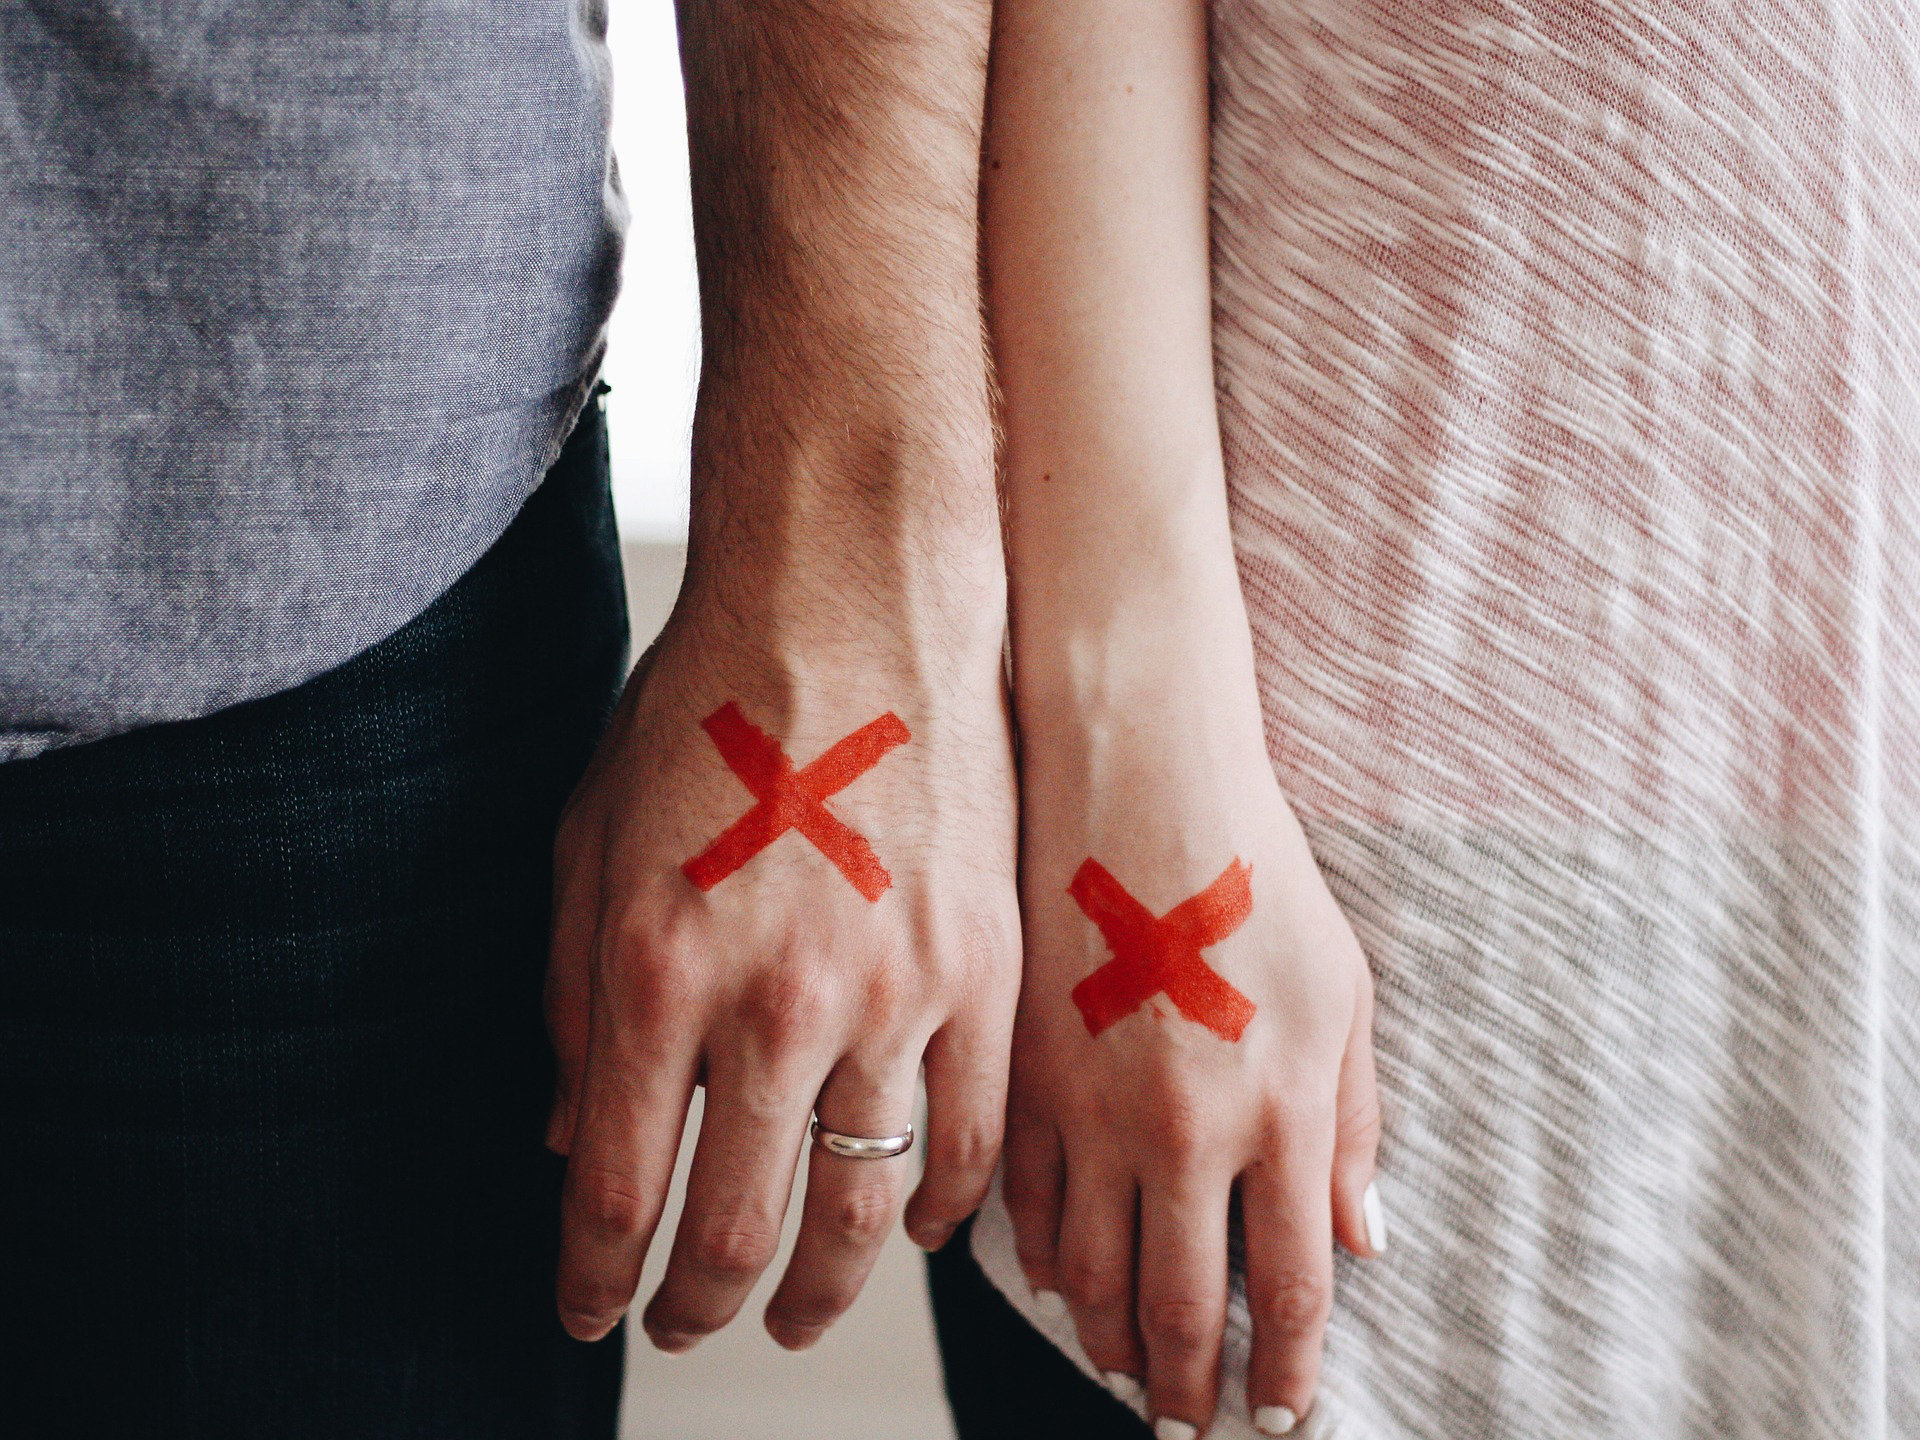 Two people’s hands marked with red X’s